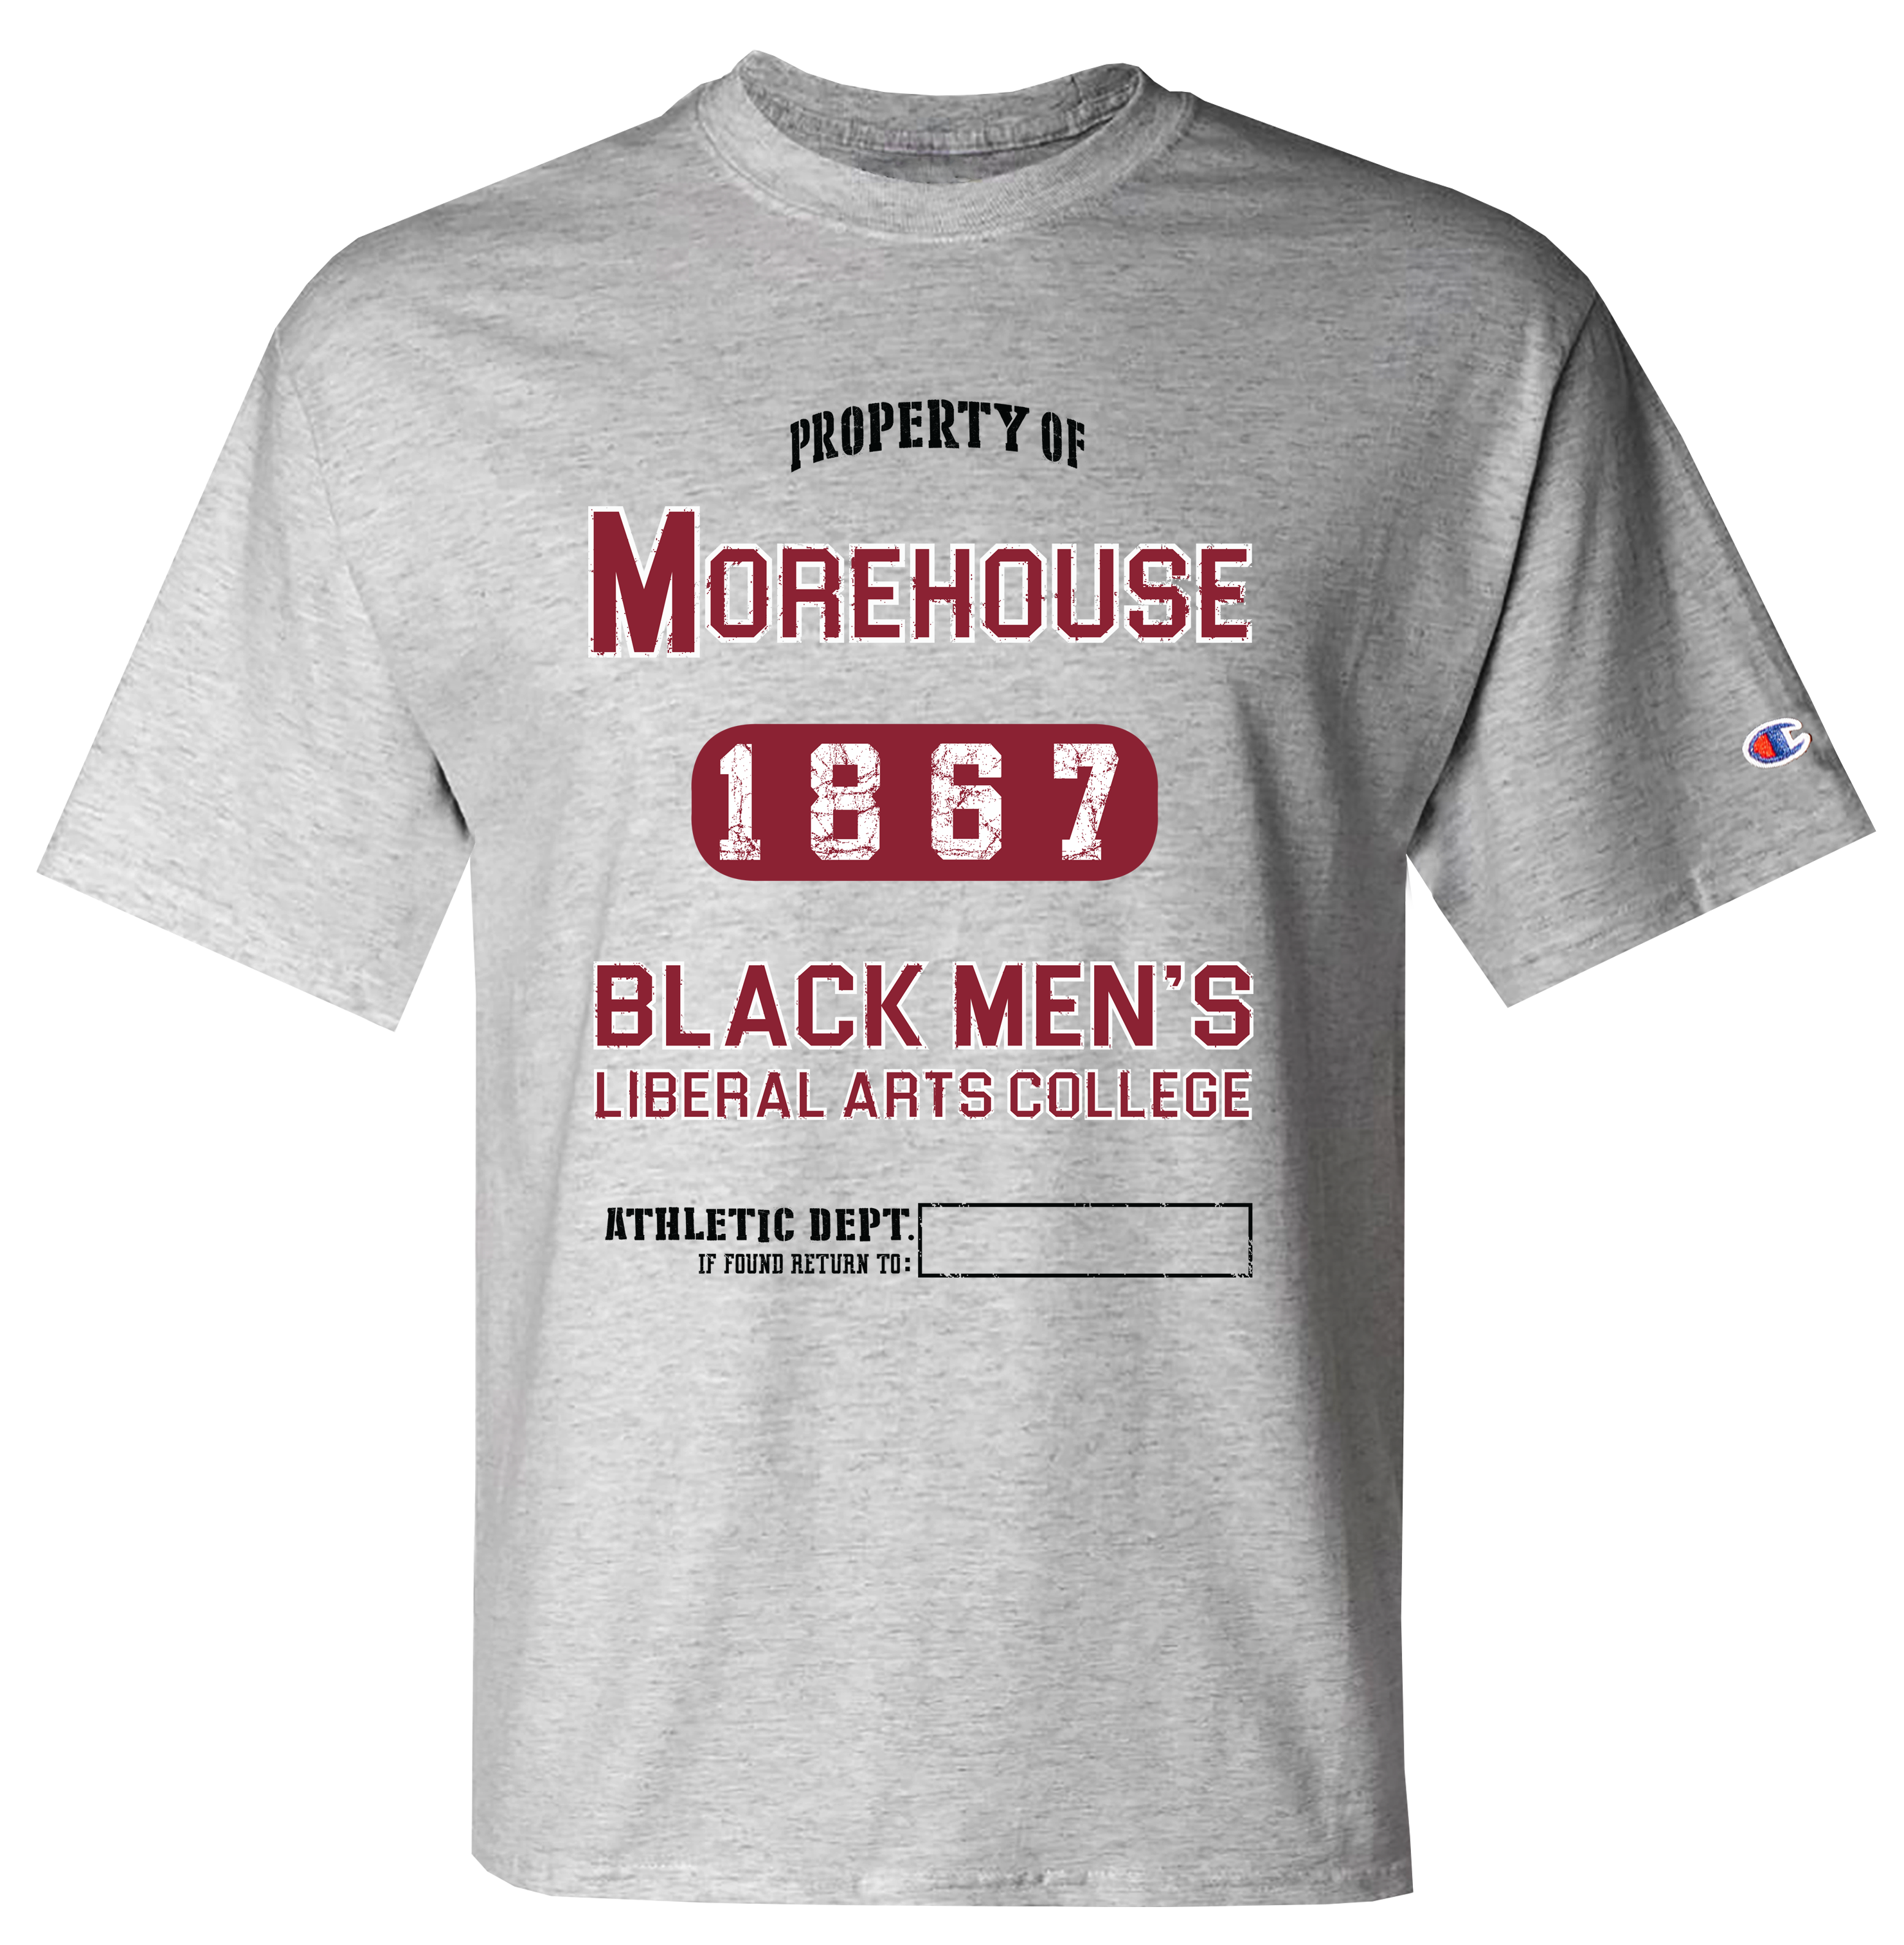 BCU X Champion Athletic Dept. Tee - Morehouse Liberal